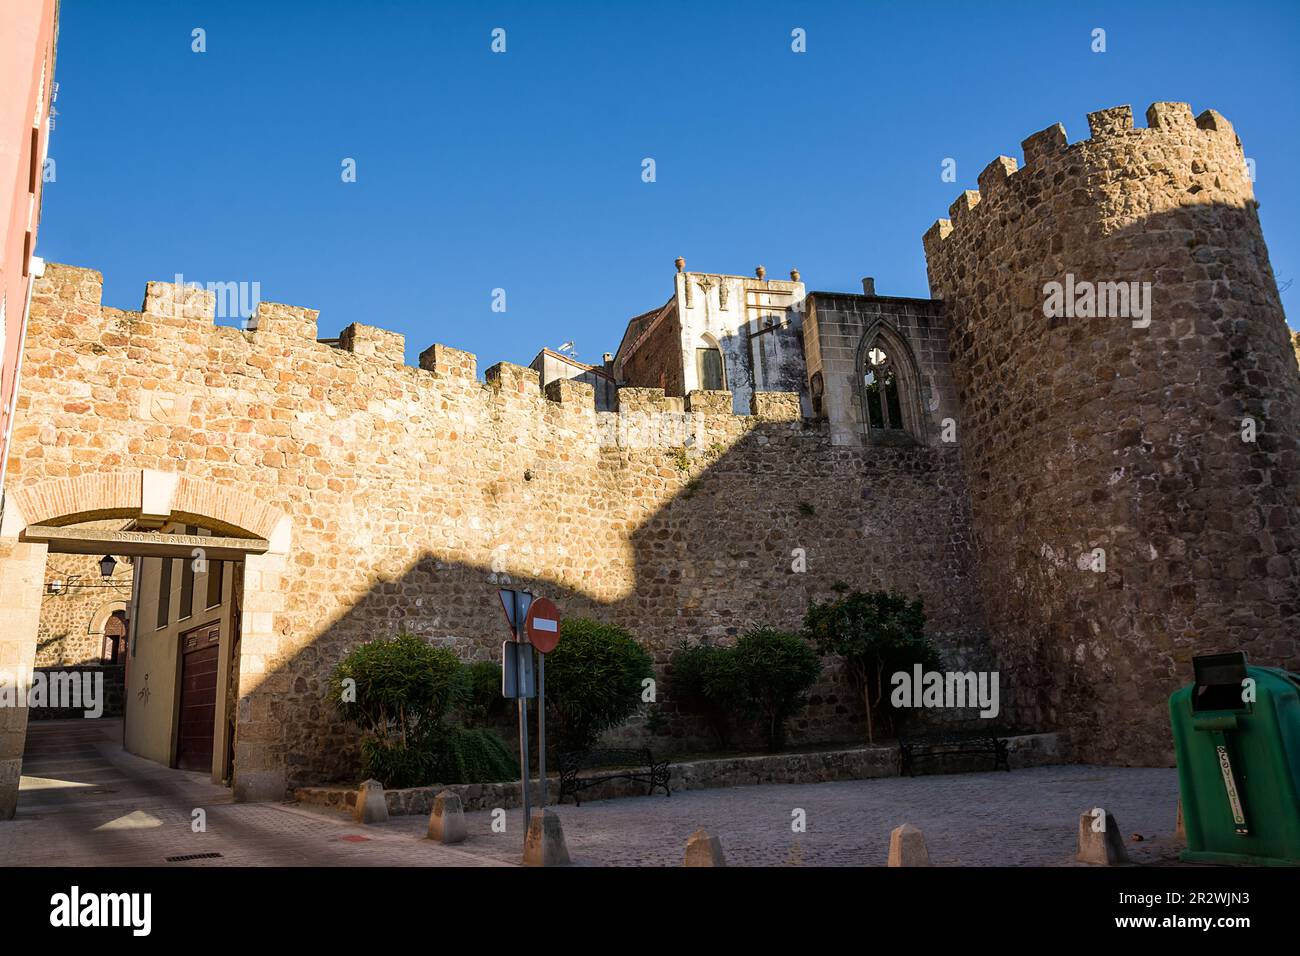 Plasencia, Spain - 25 June 2022: One of the entrance gates through the fortified walls of the city of Plasencia, Spain Stock Photo